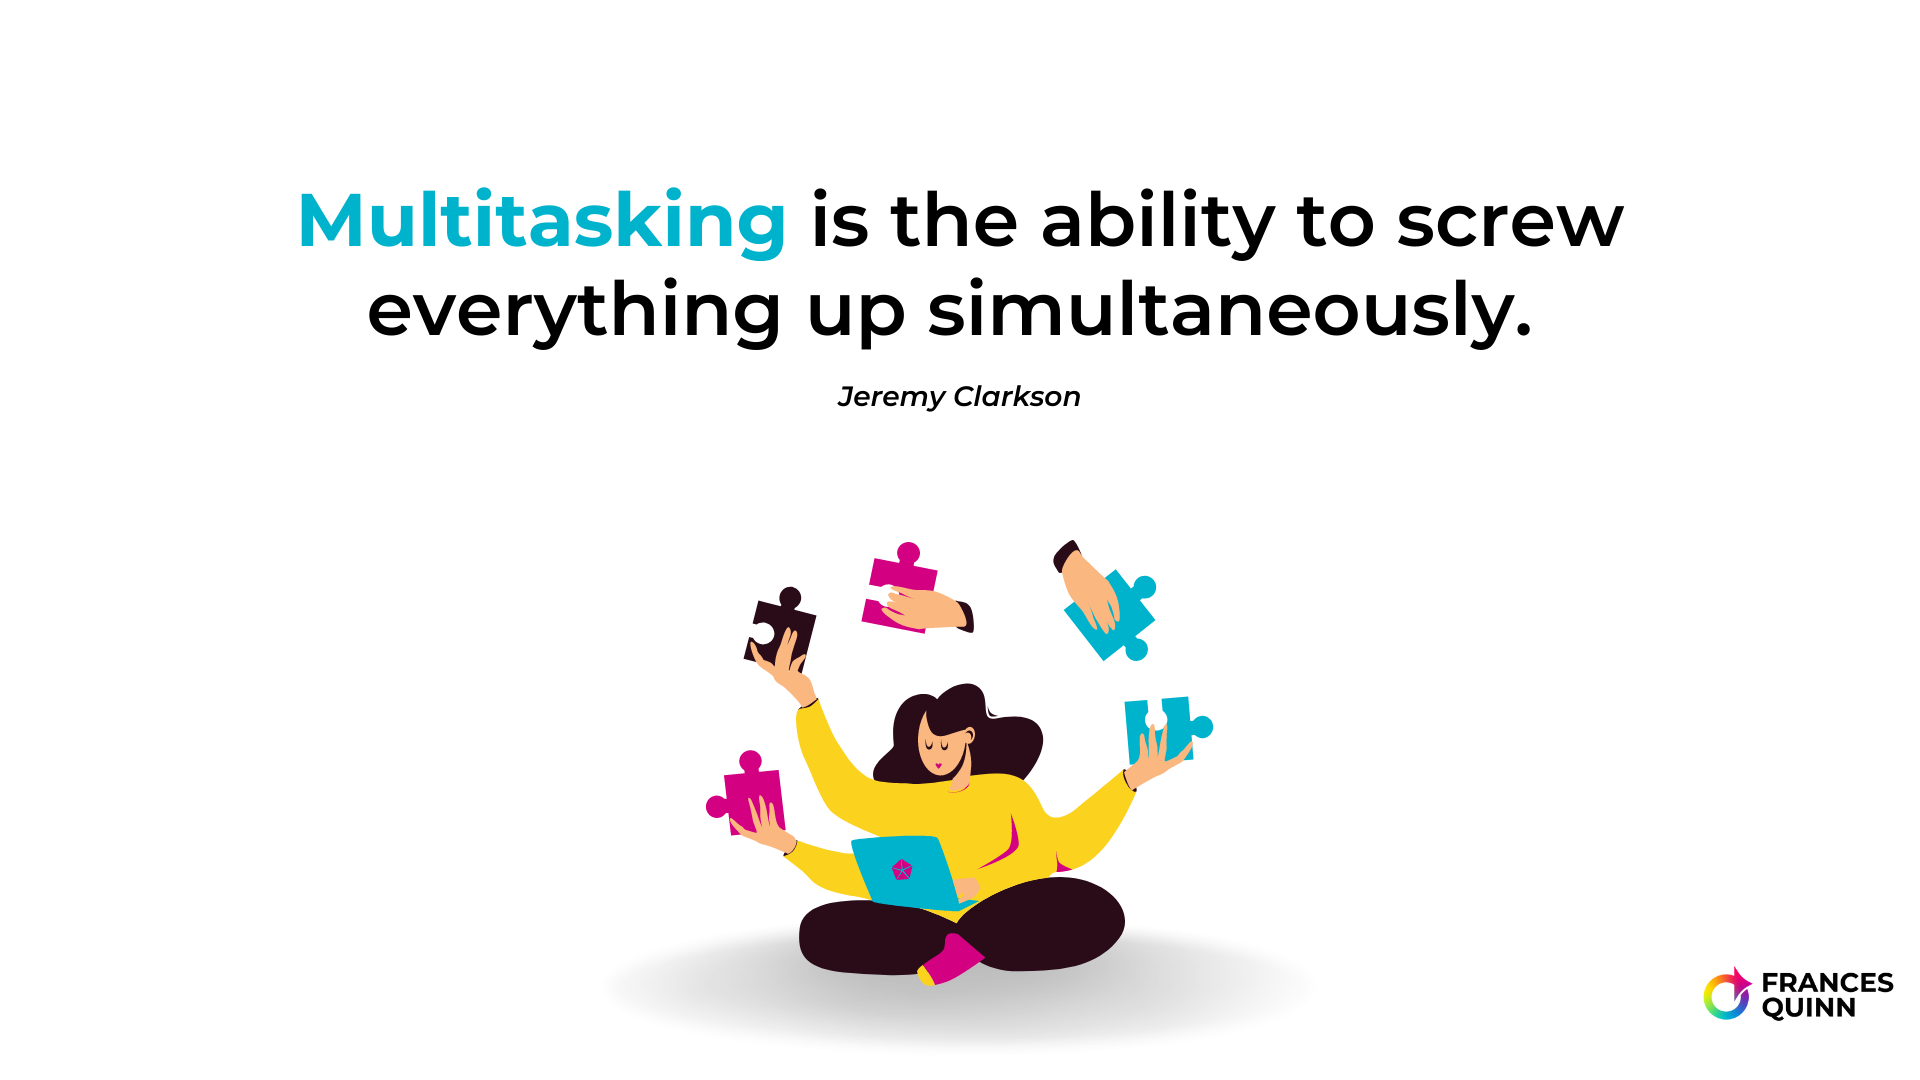 "Multitasking is the ability to screw everything up simultaneously."